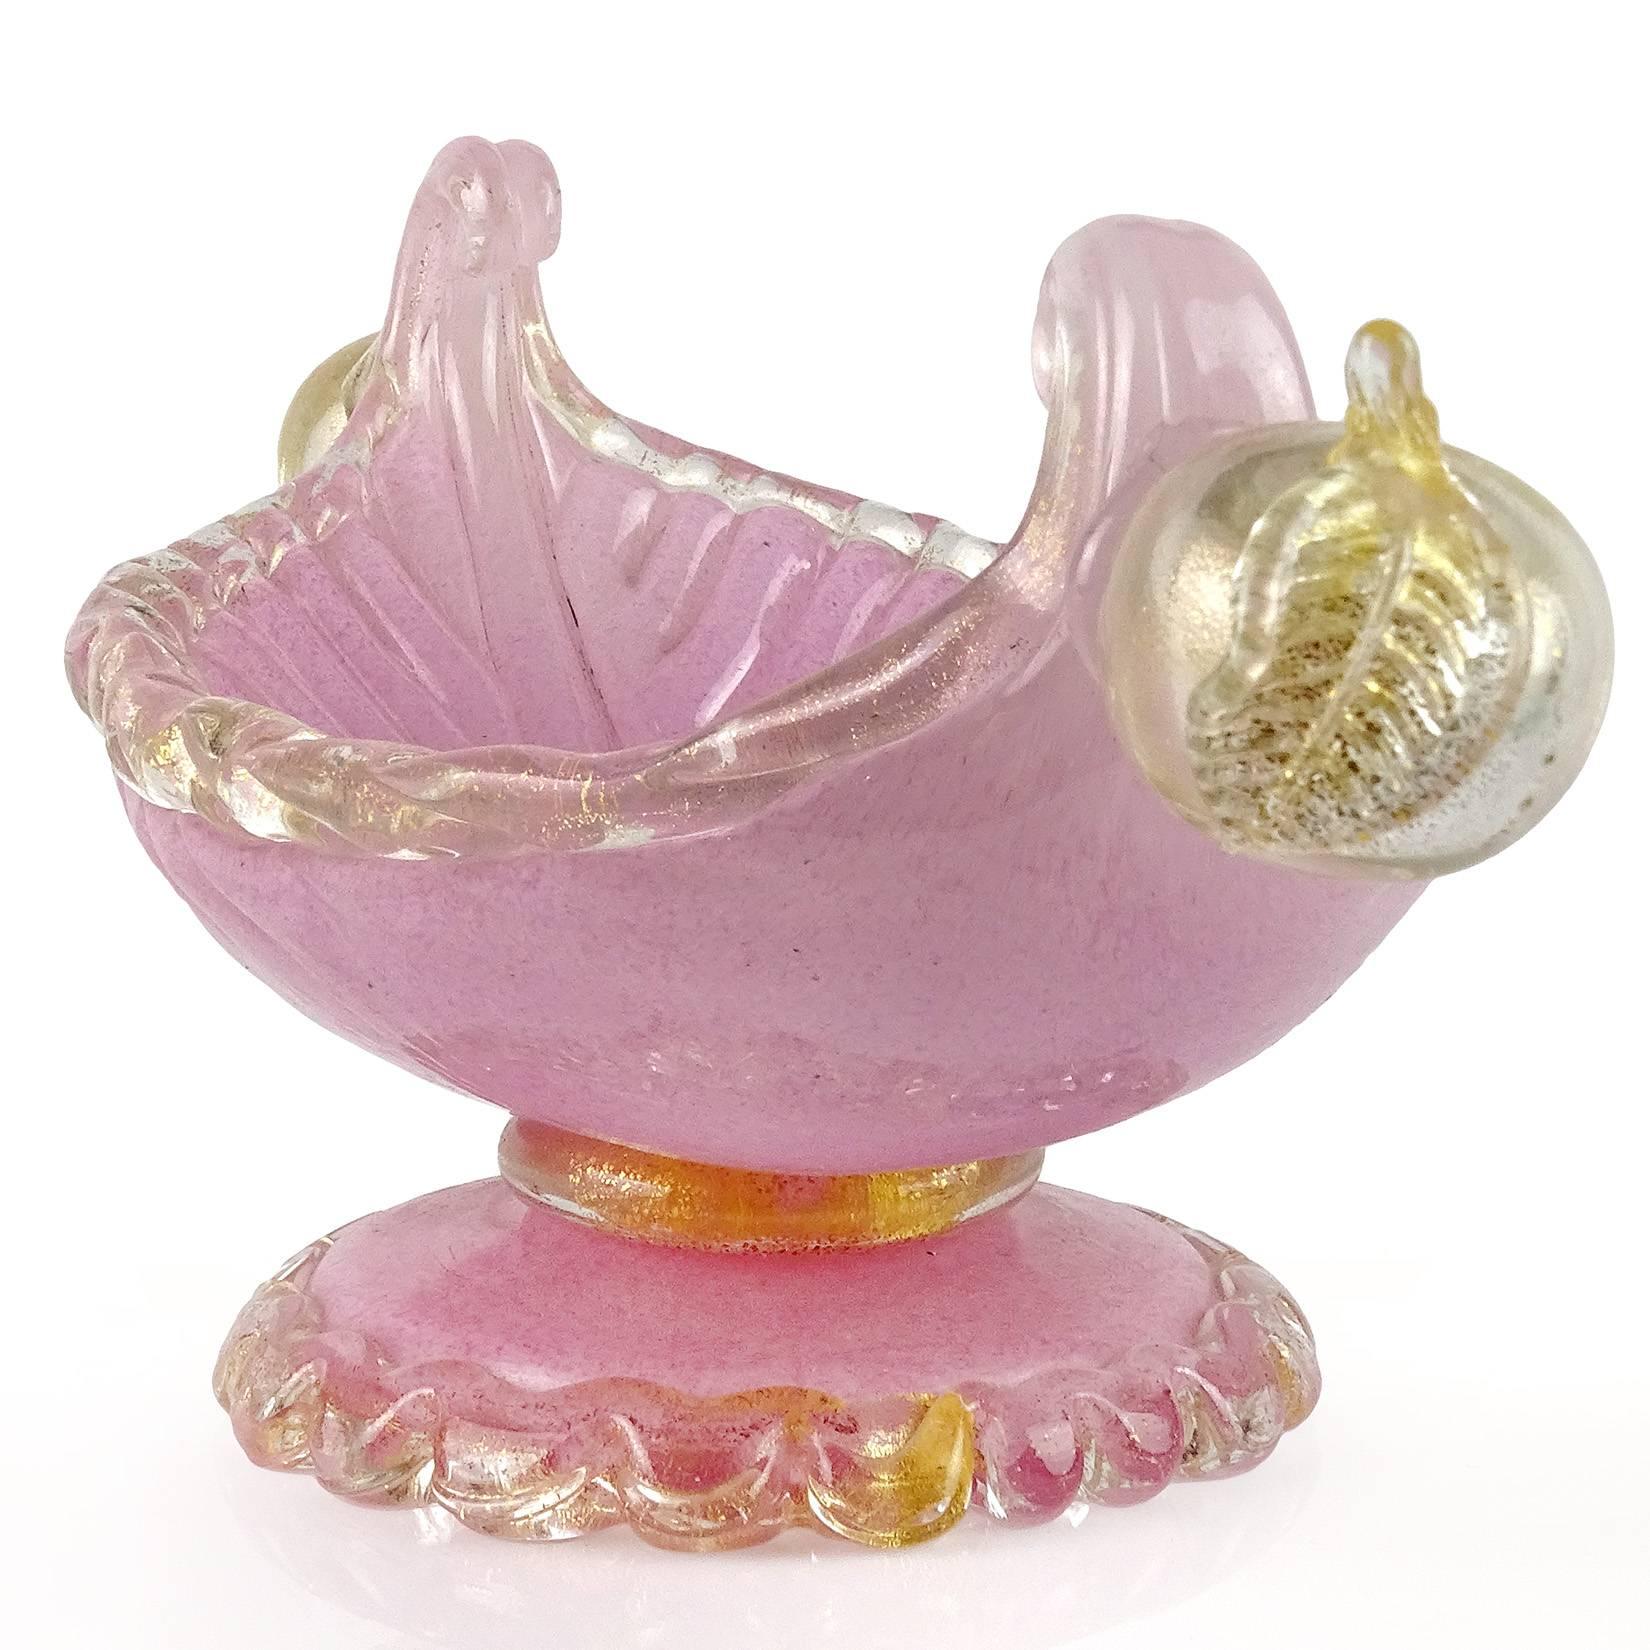 Hand-Crafted Barovier Toso Murano Pink Gold Flecks Italian Art Glass Fruit Compote Bowl